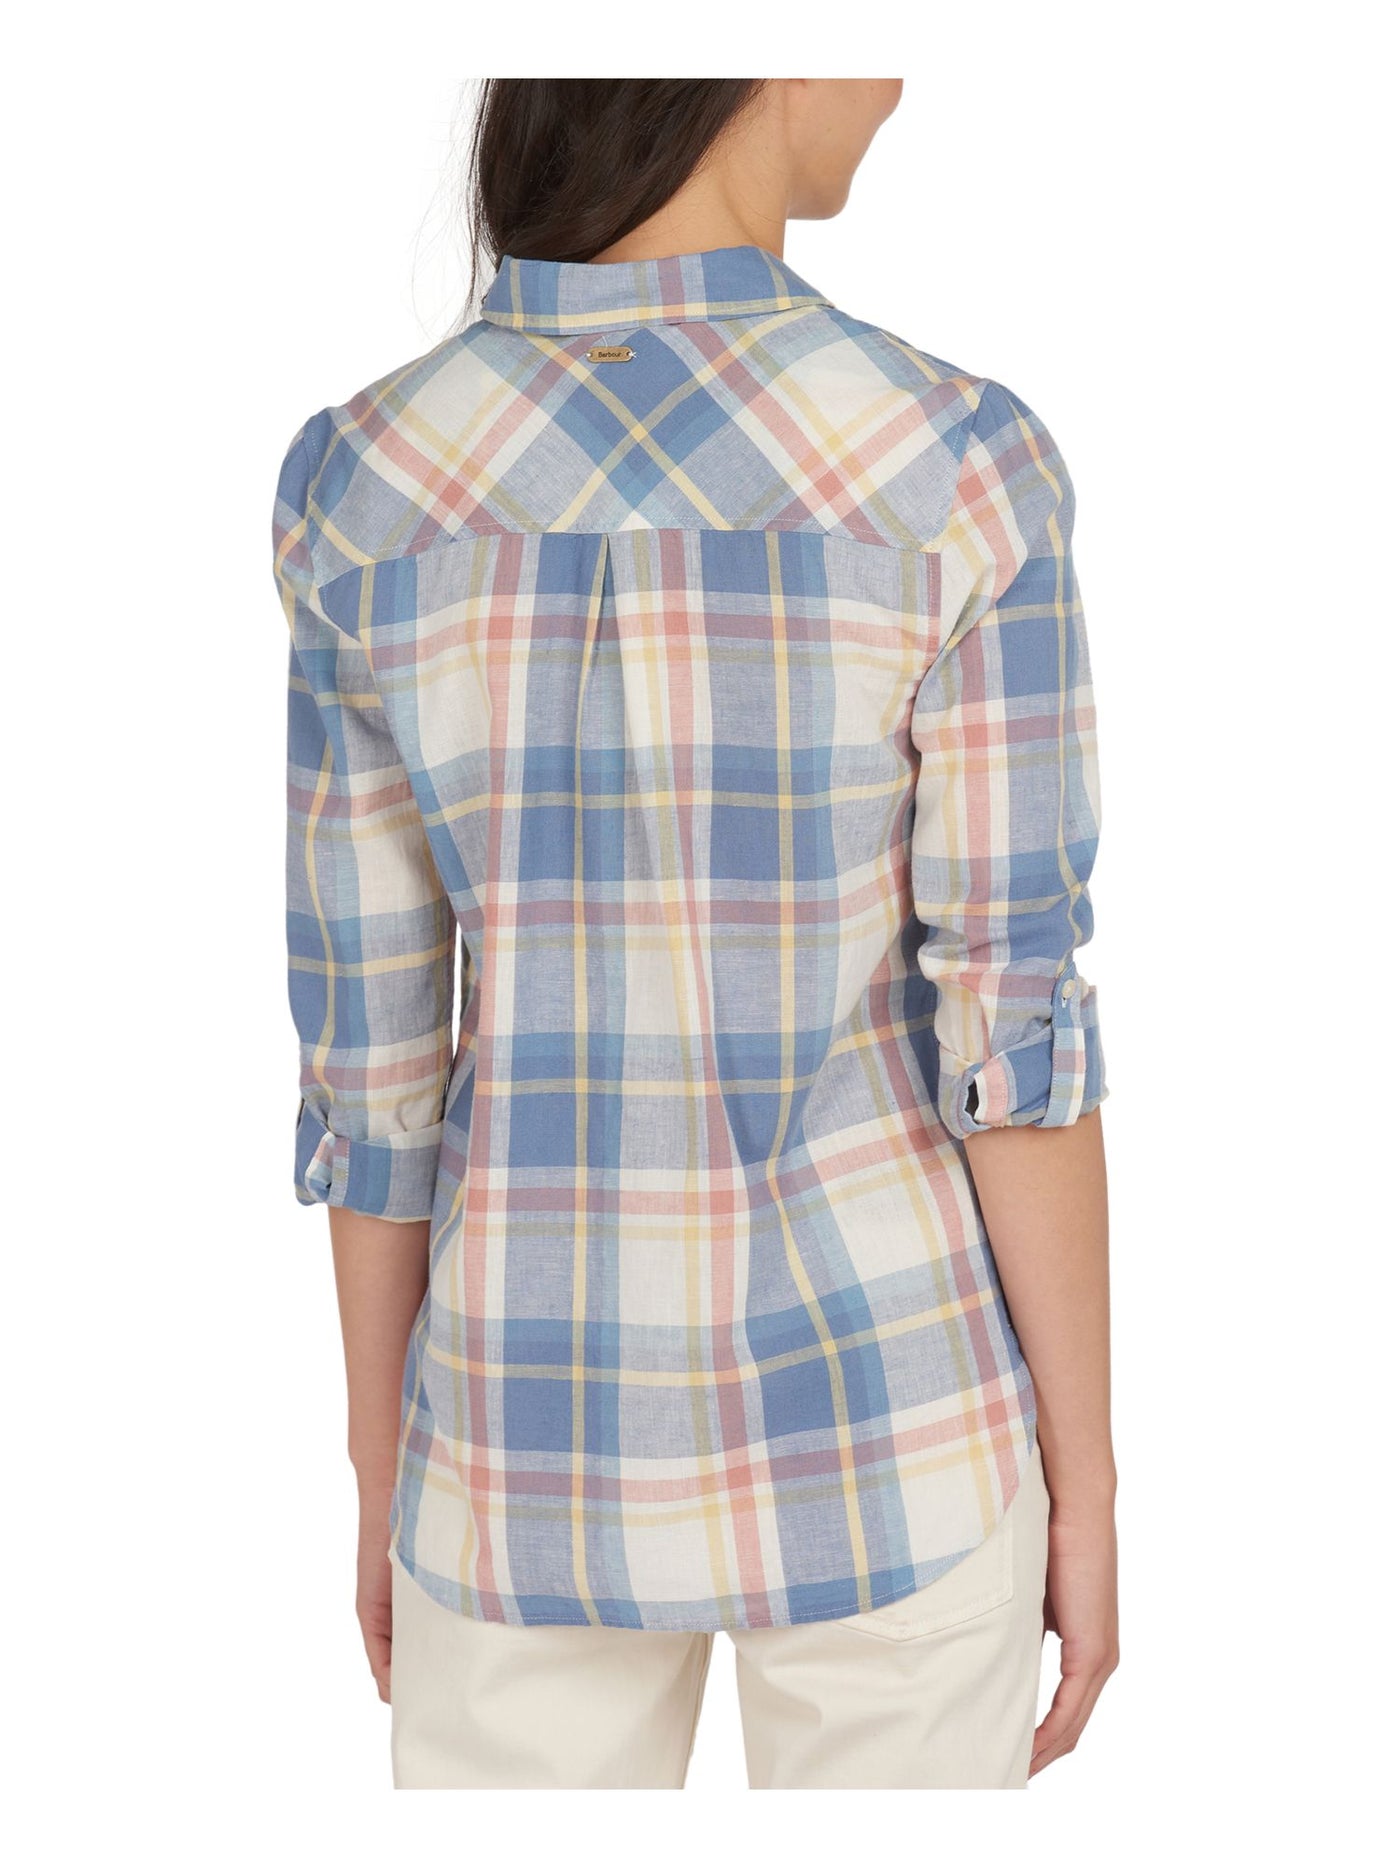 BARBOUR Womens Pink Plaid Collared Button Up Top 6